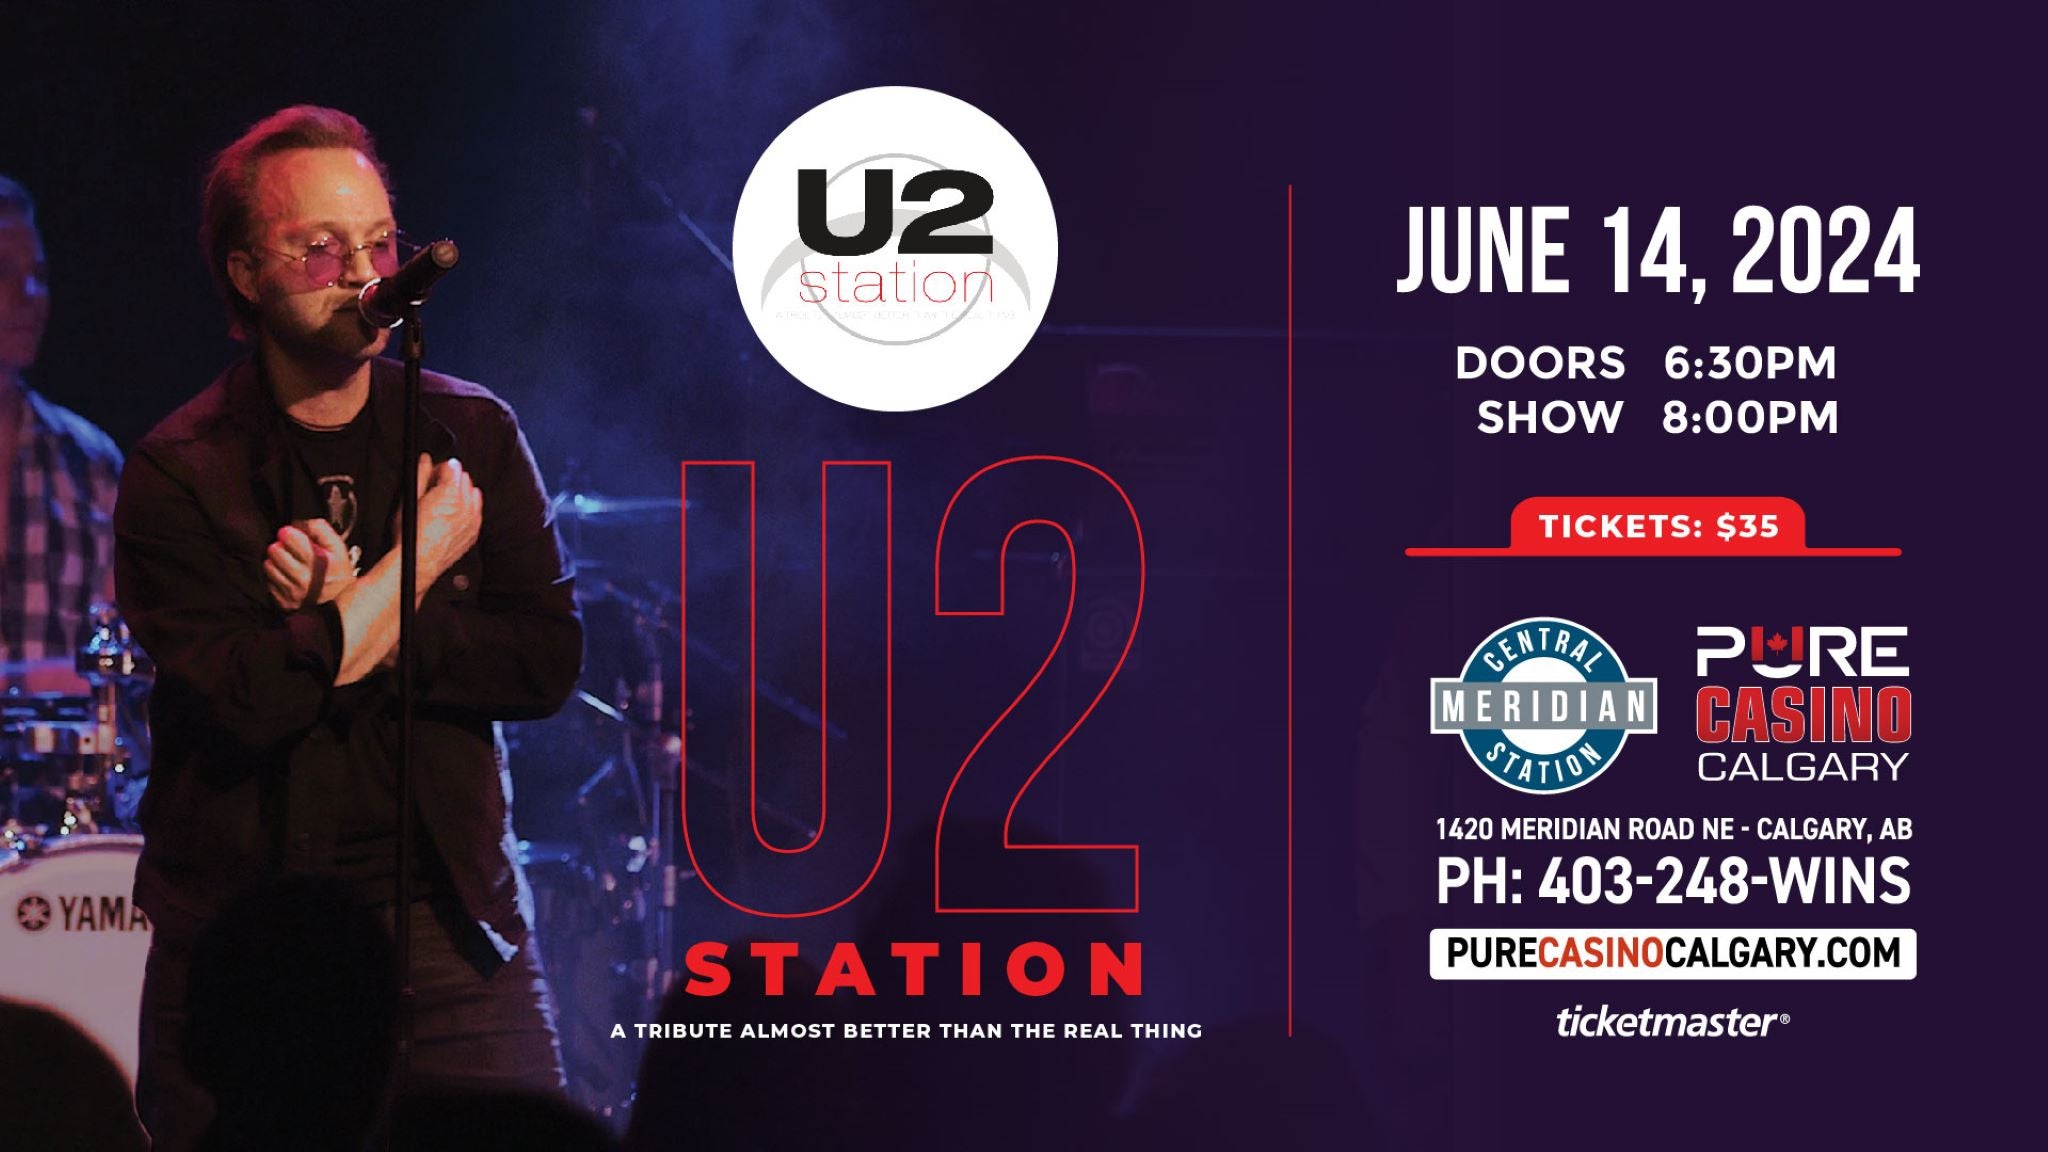 U2 Station - a Tribute Almost Better Than the Real Thing